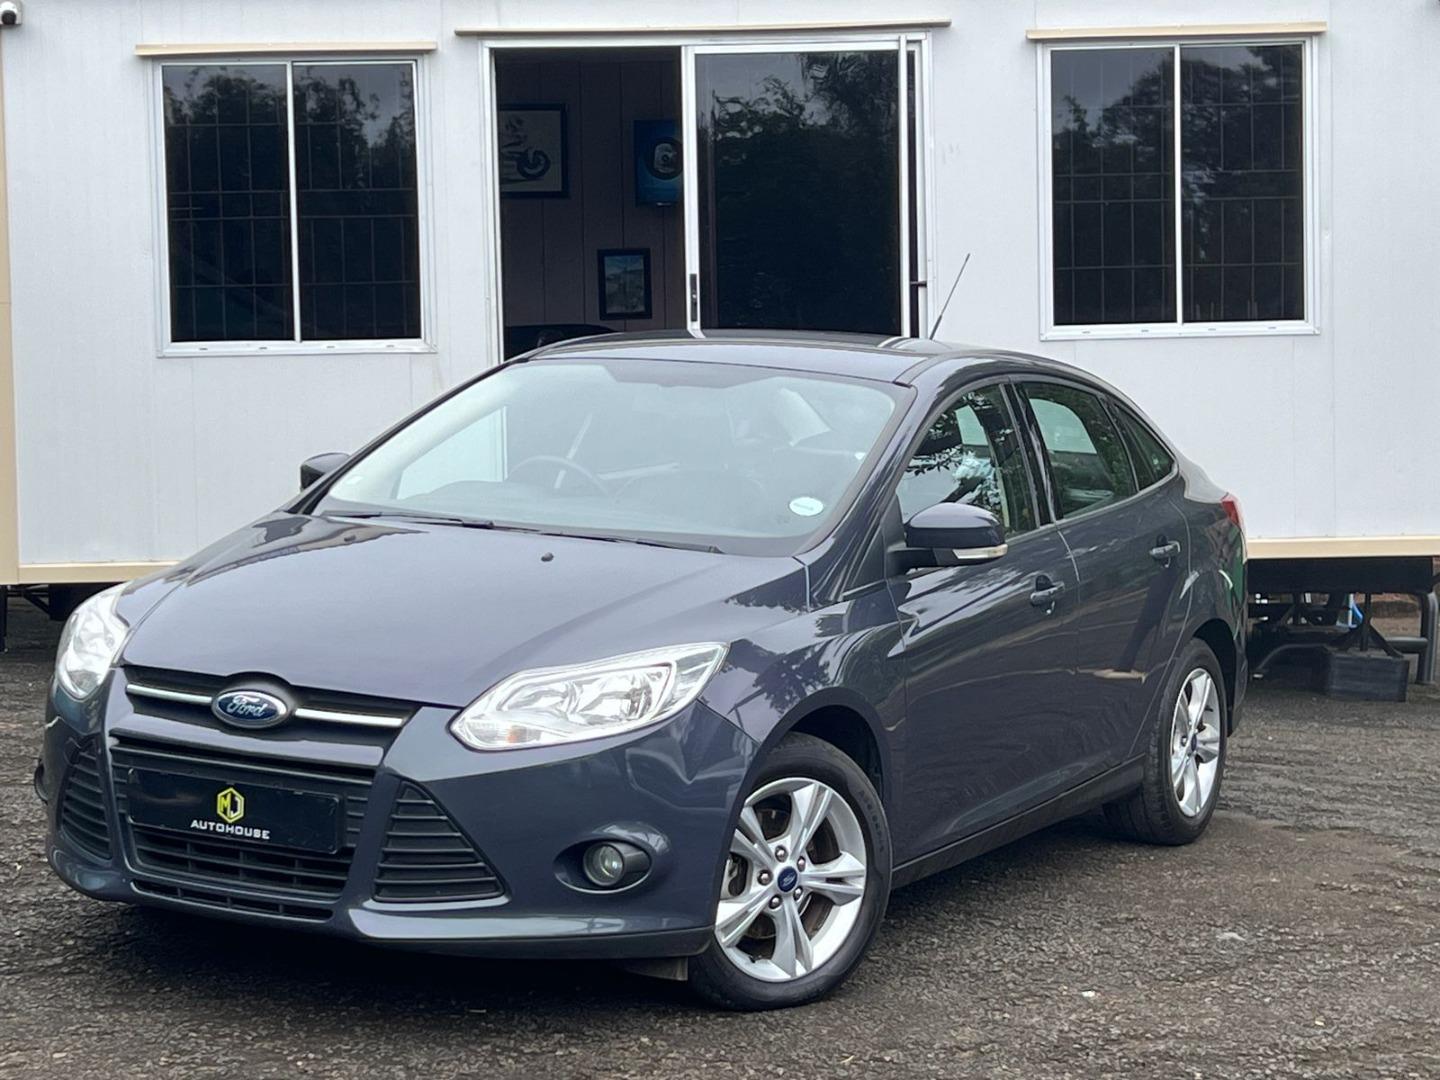 2012 Ford Focus Hatch 1.6 Trend For Sale